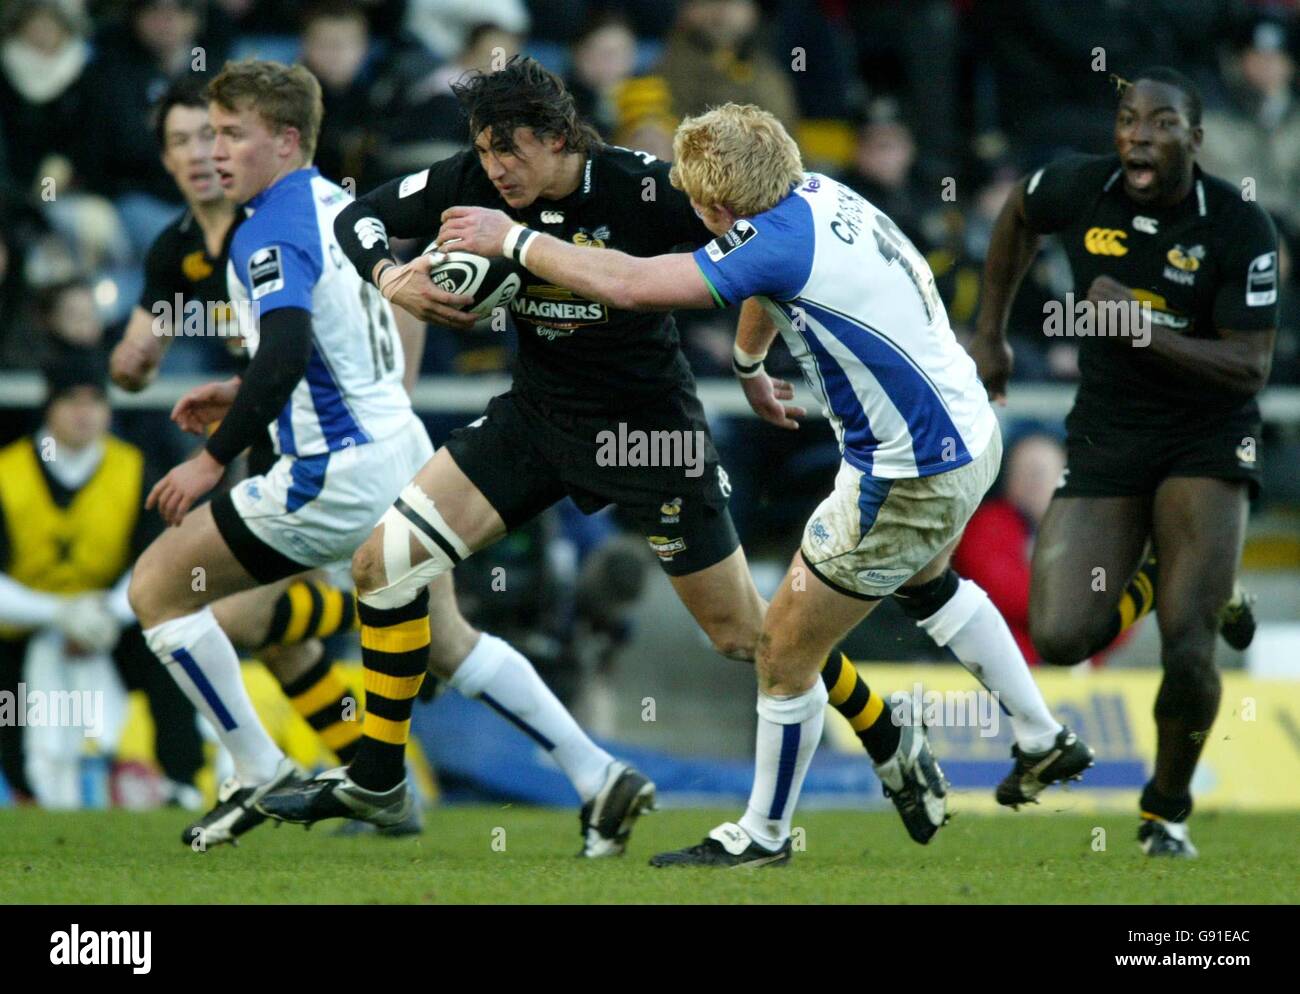 Rugby Union - Guinness Premiership - London Wasps v Bath Rugby - Causeway Stadium. London Wasps' Rob Hoadley is tackled by Bath Rugby's Alex Crockett. Stock Photo